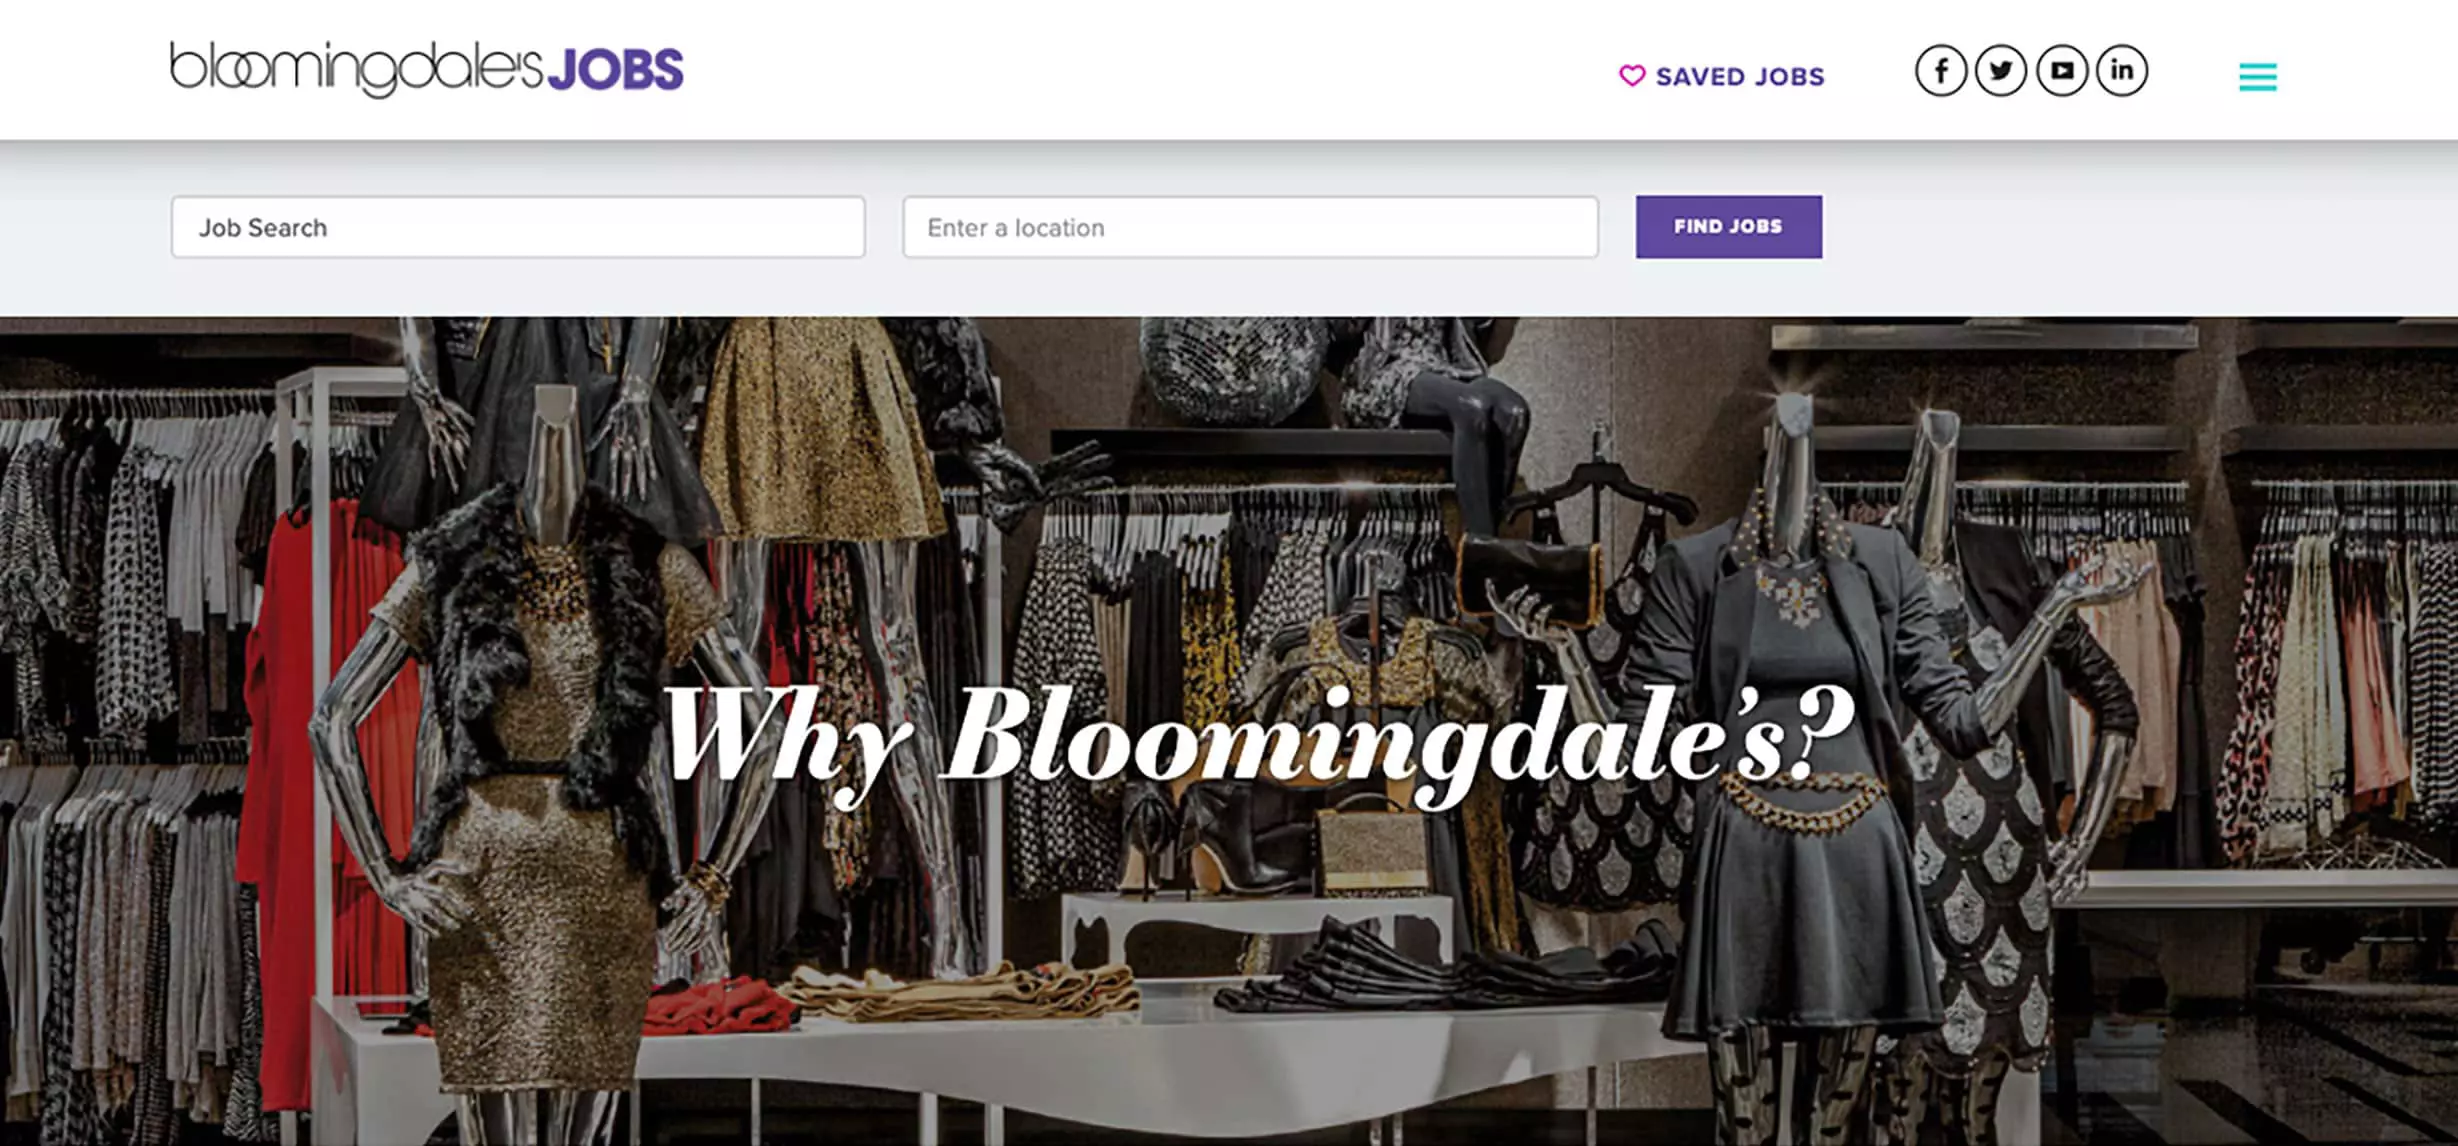 Close up of Bloomingdale's Jobs home page